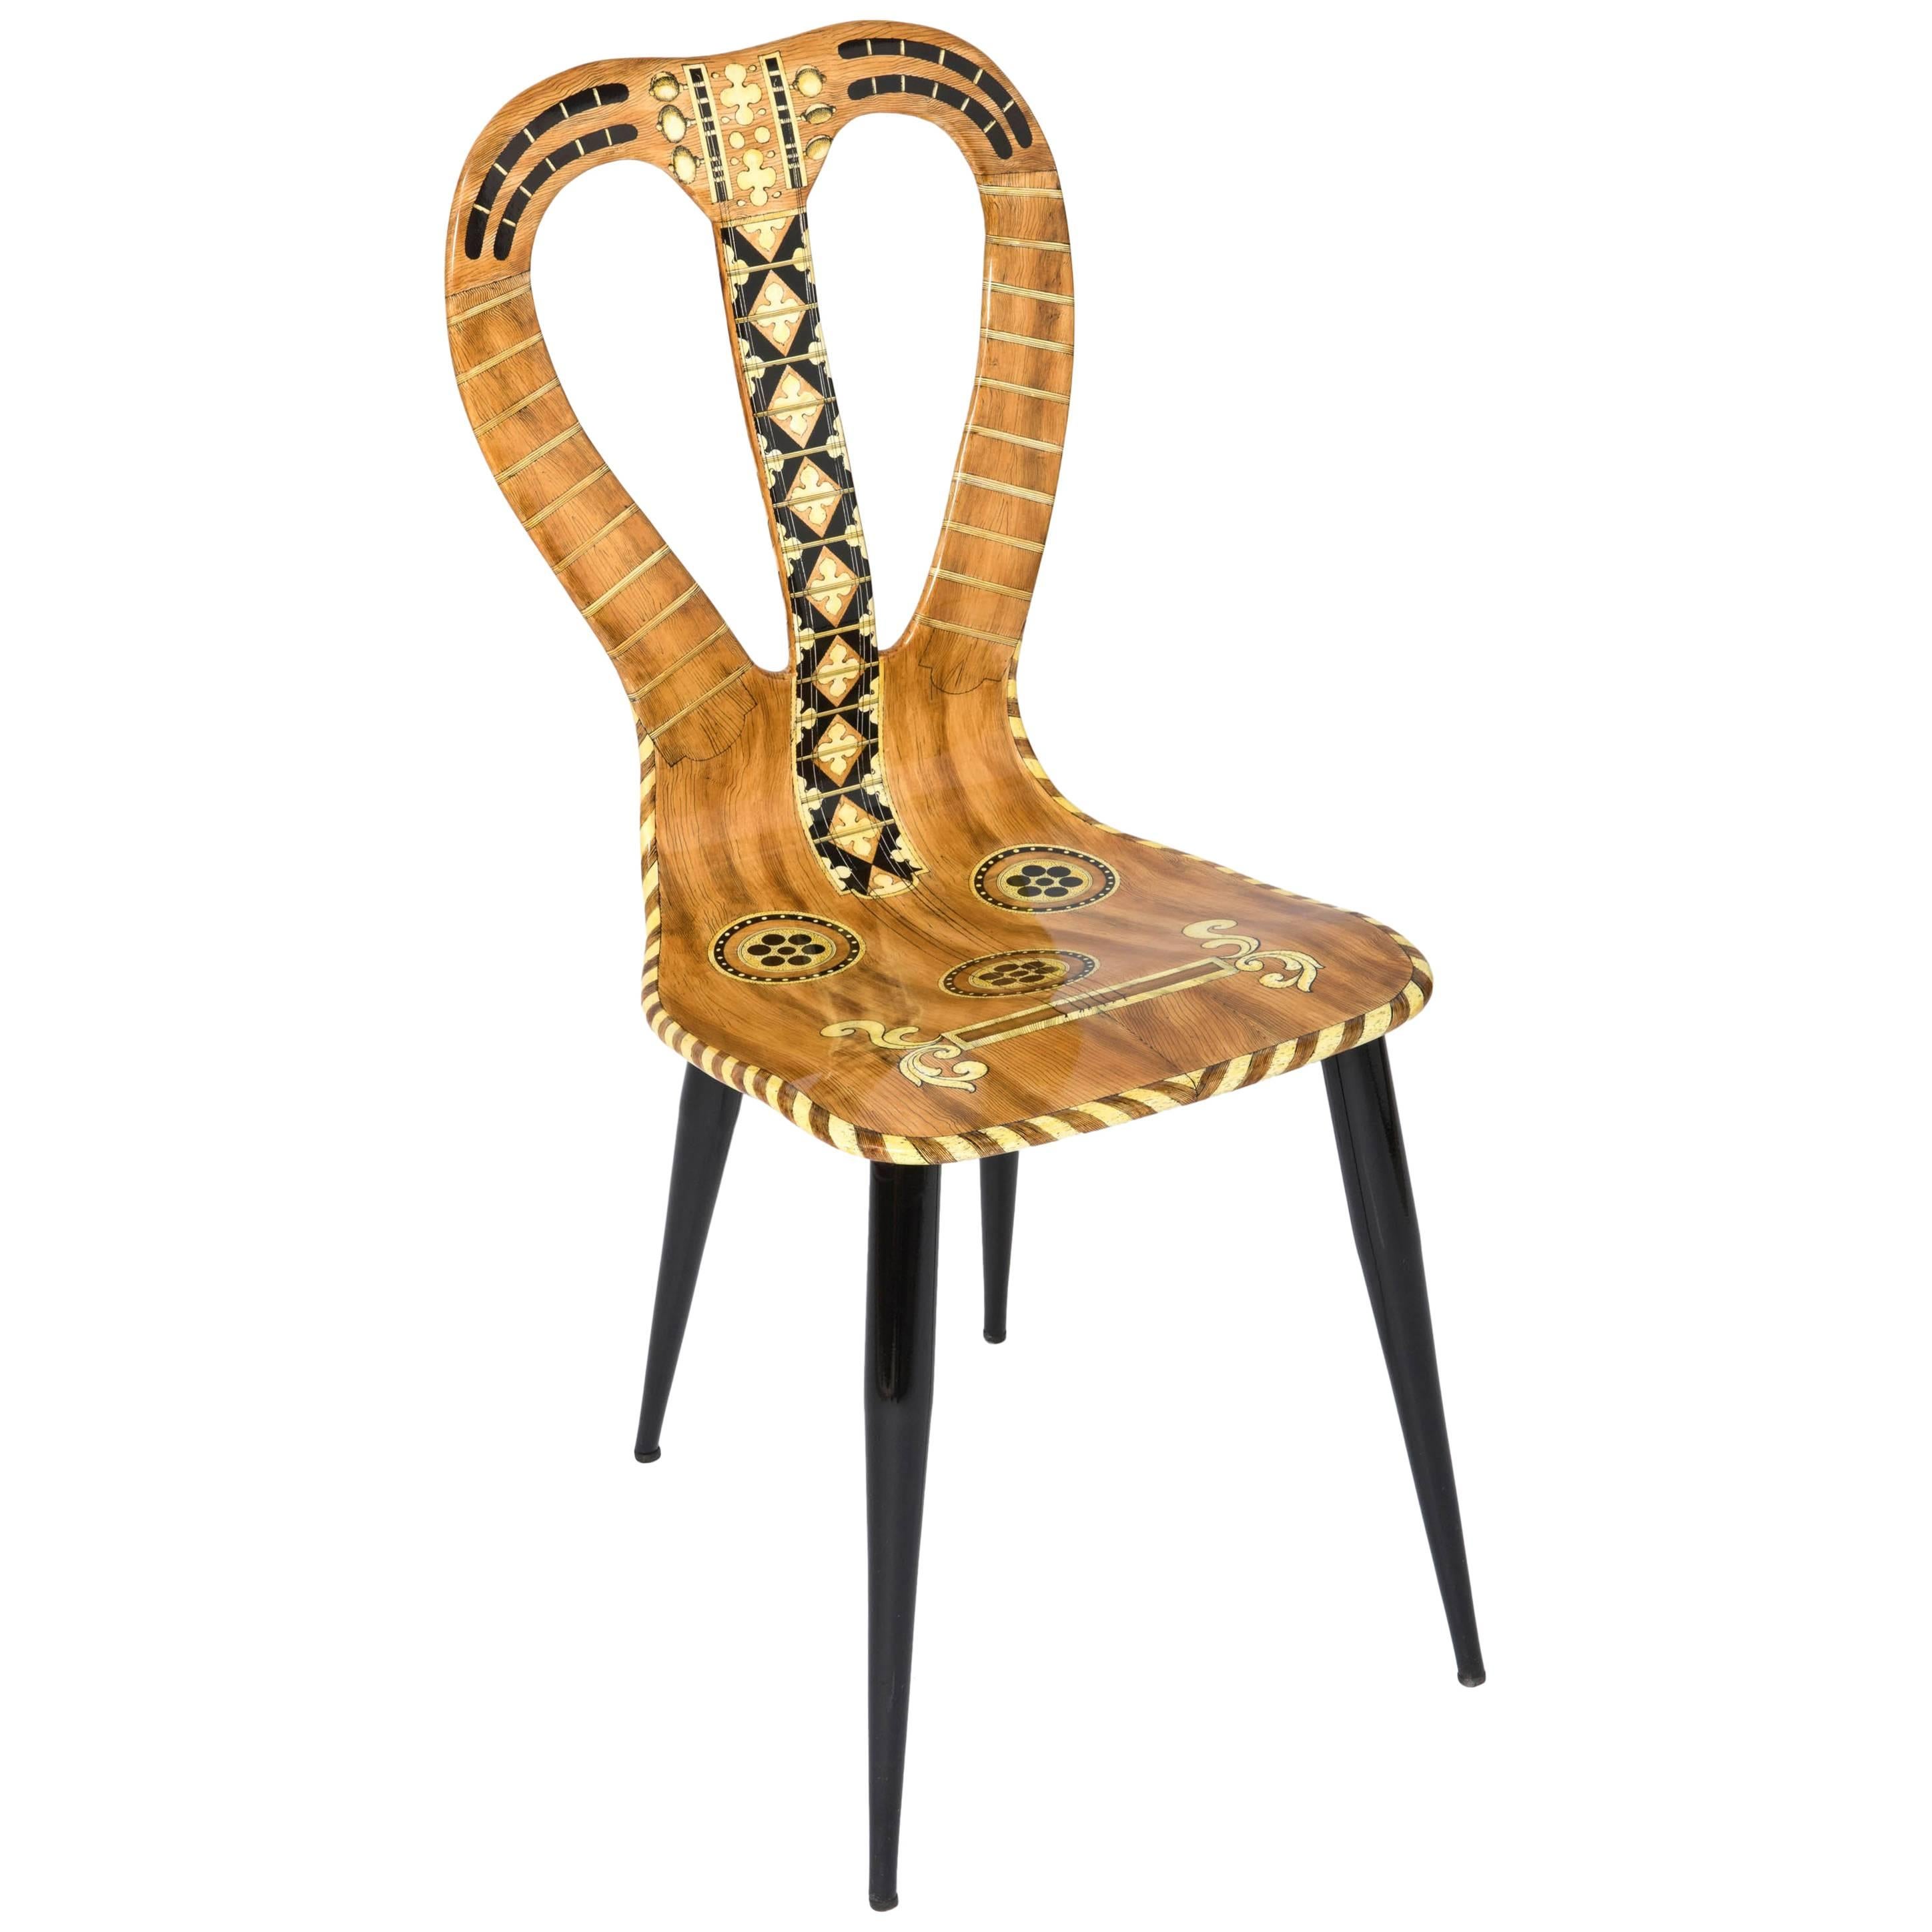 Atelier Fornasetti chair "Musicale", Italy 1989 For Sale